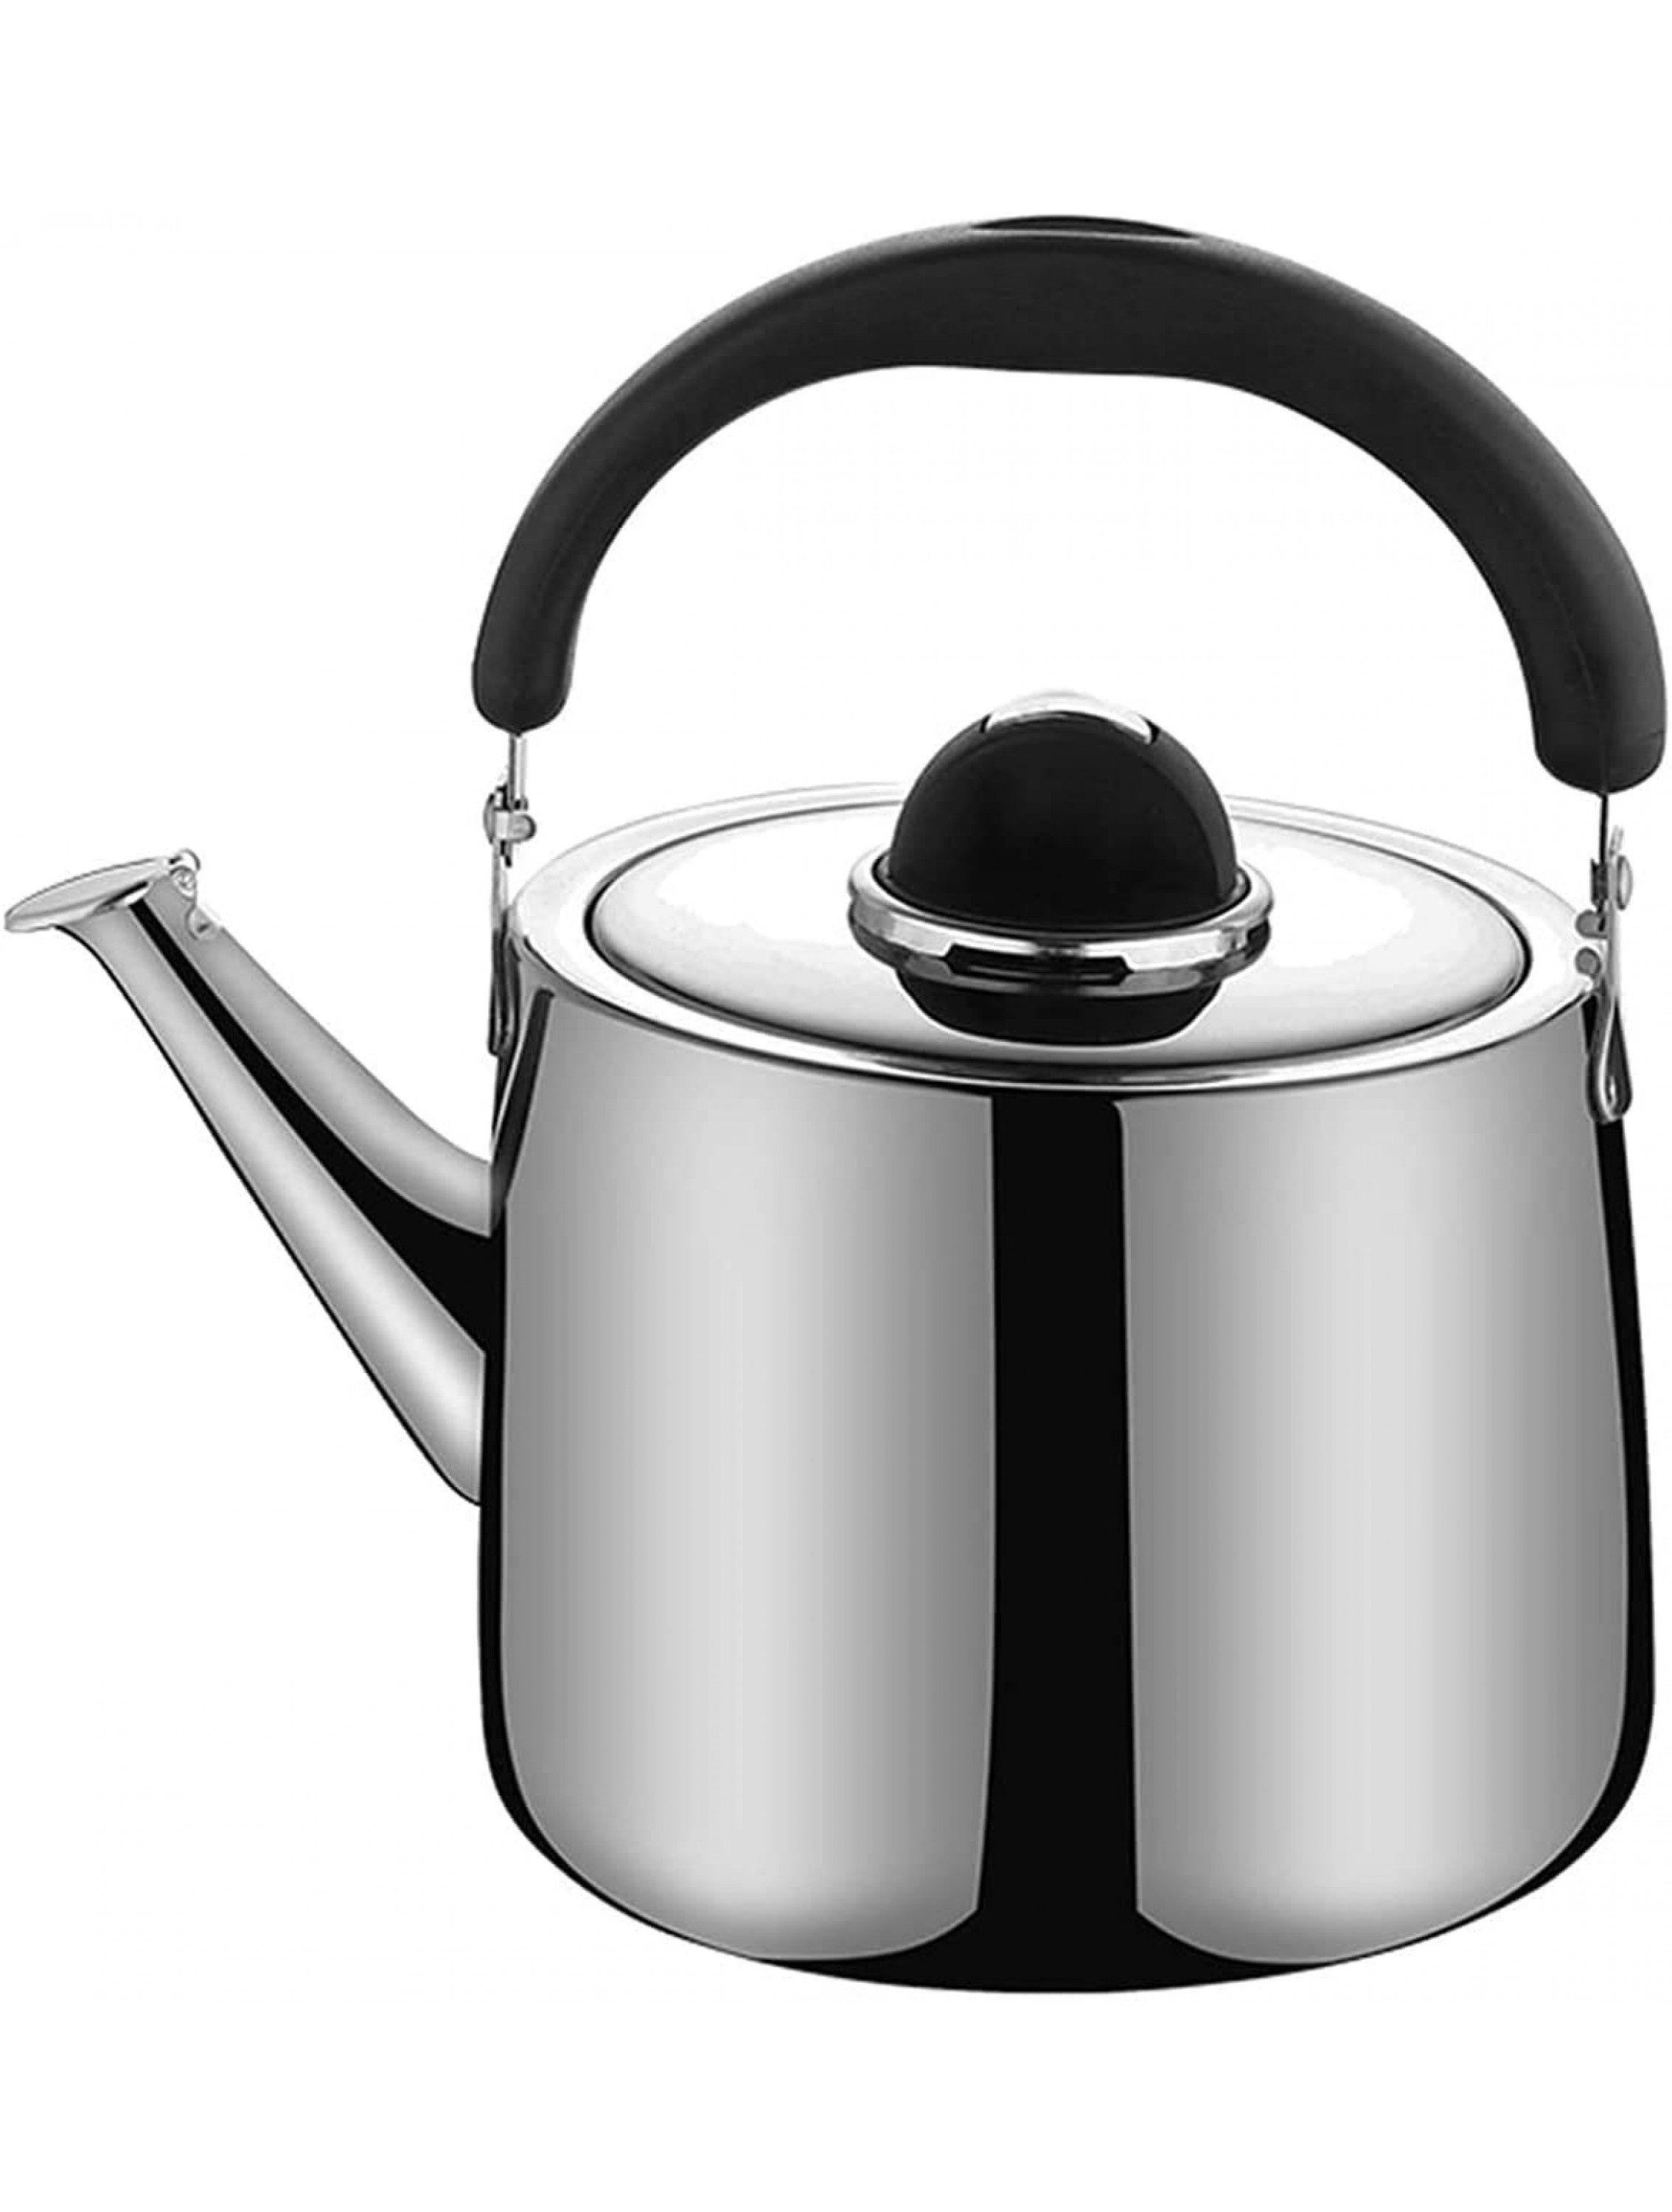 GQCSF Teapots Tea Kettle Whistling Whistling Tea Kettle for Stove Top Camping Kettles Stainless Steel for Boiling Water Large Capacity Tea Kettles GQCSF220426Size:7L - BYKMA8UER